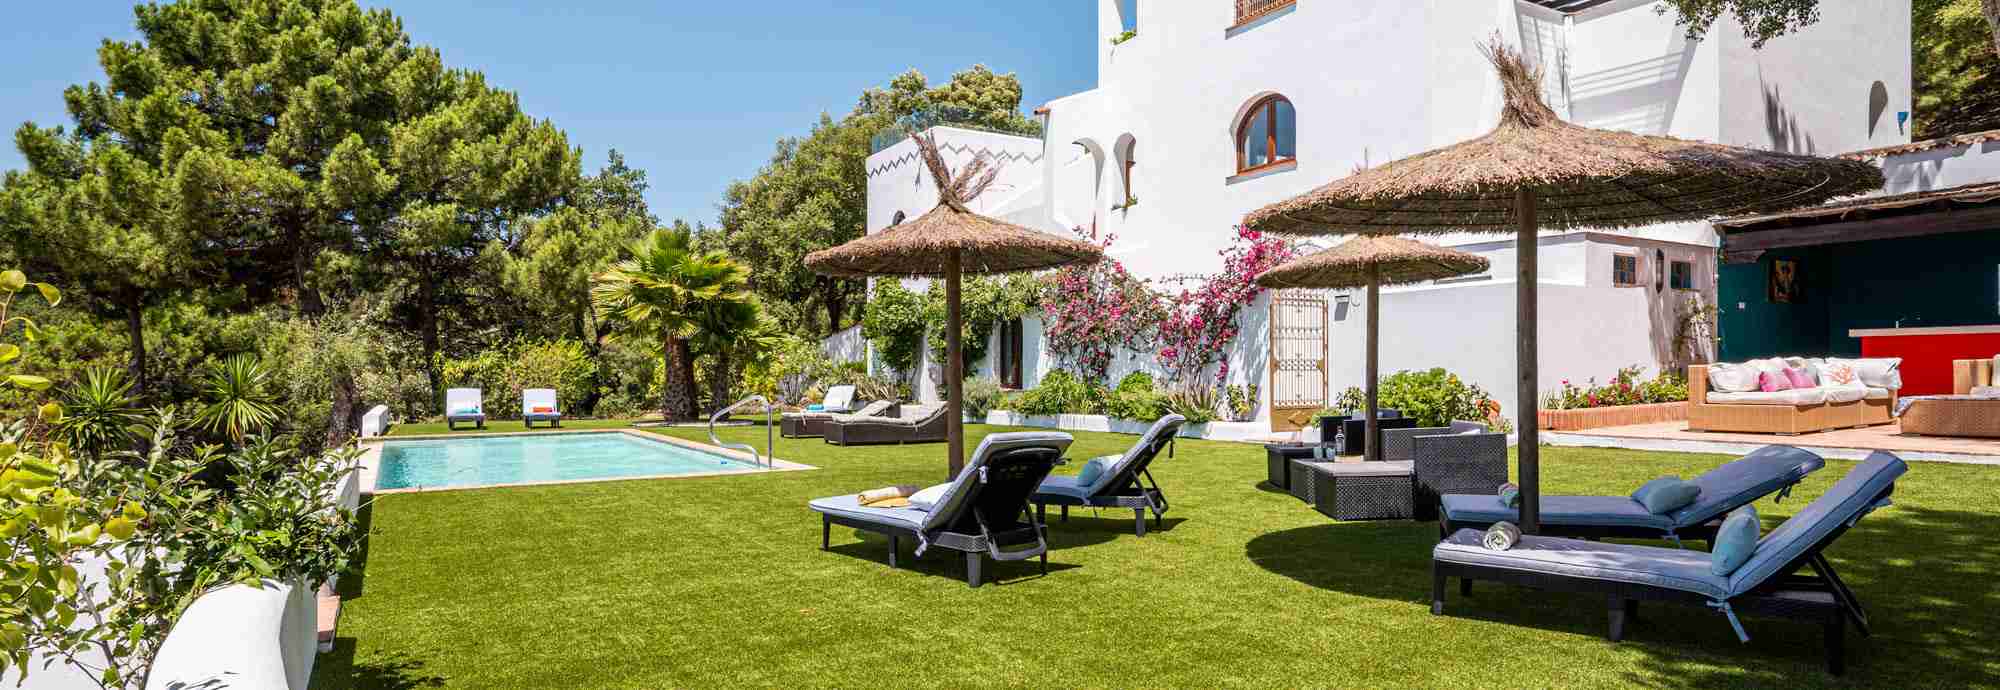 Well equipped Moorish style villa with infinity pool in stunning setting